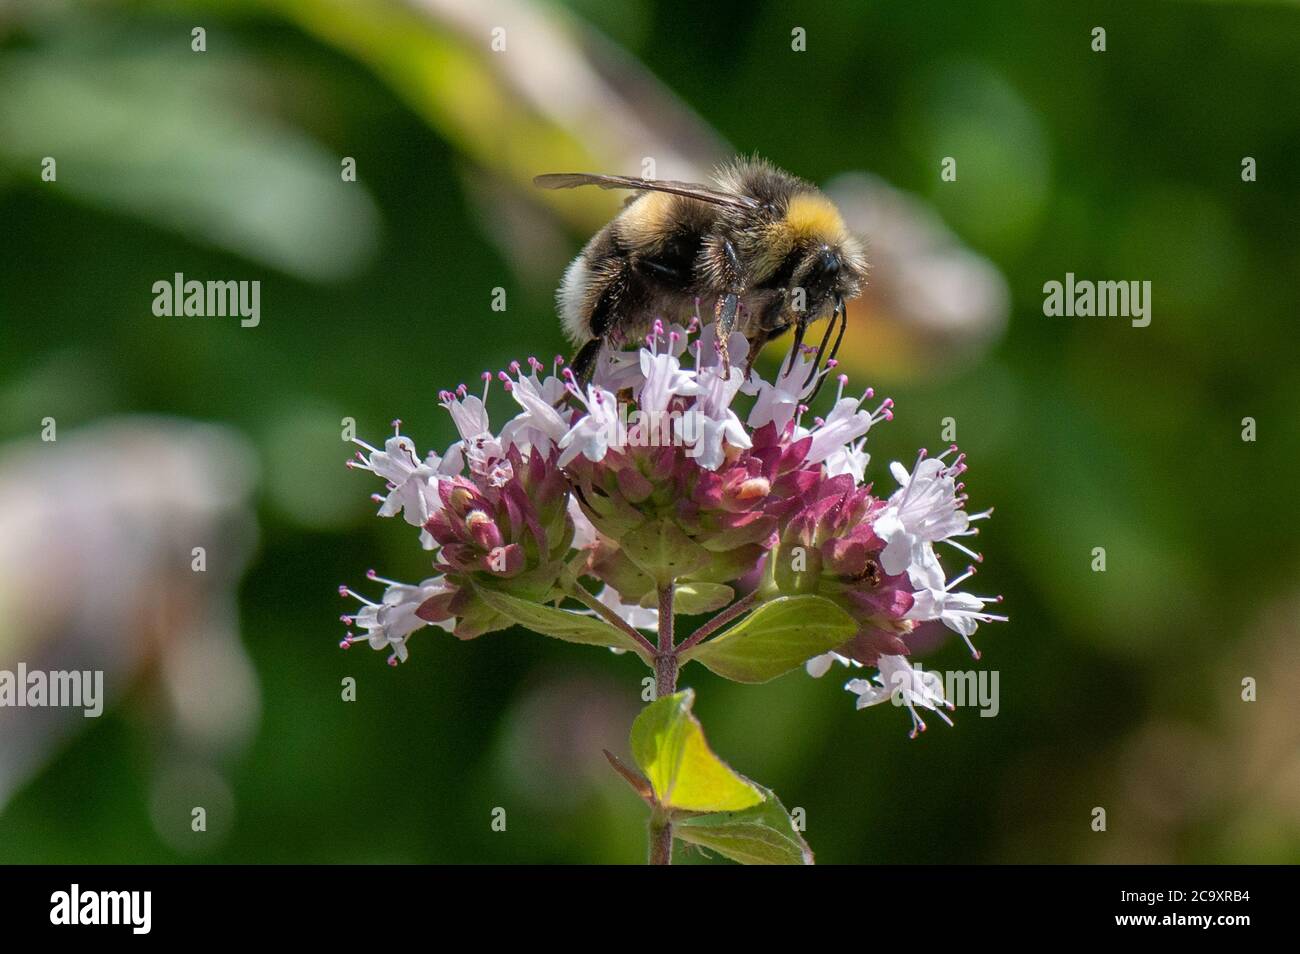 Bumblebee sur asclepias Blossom, Hambourg, Allemagne Banque D'Images